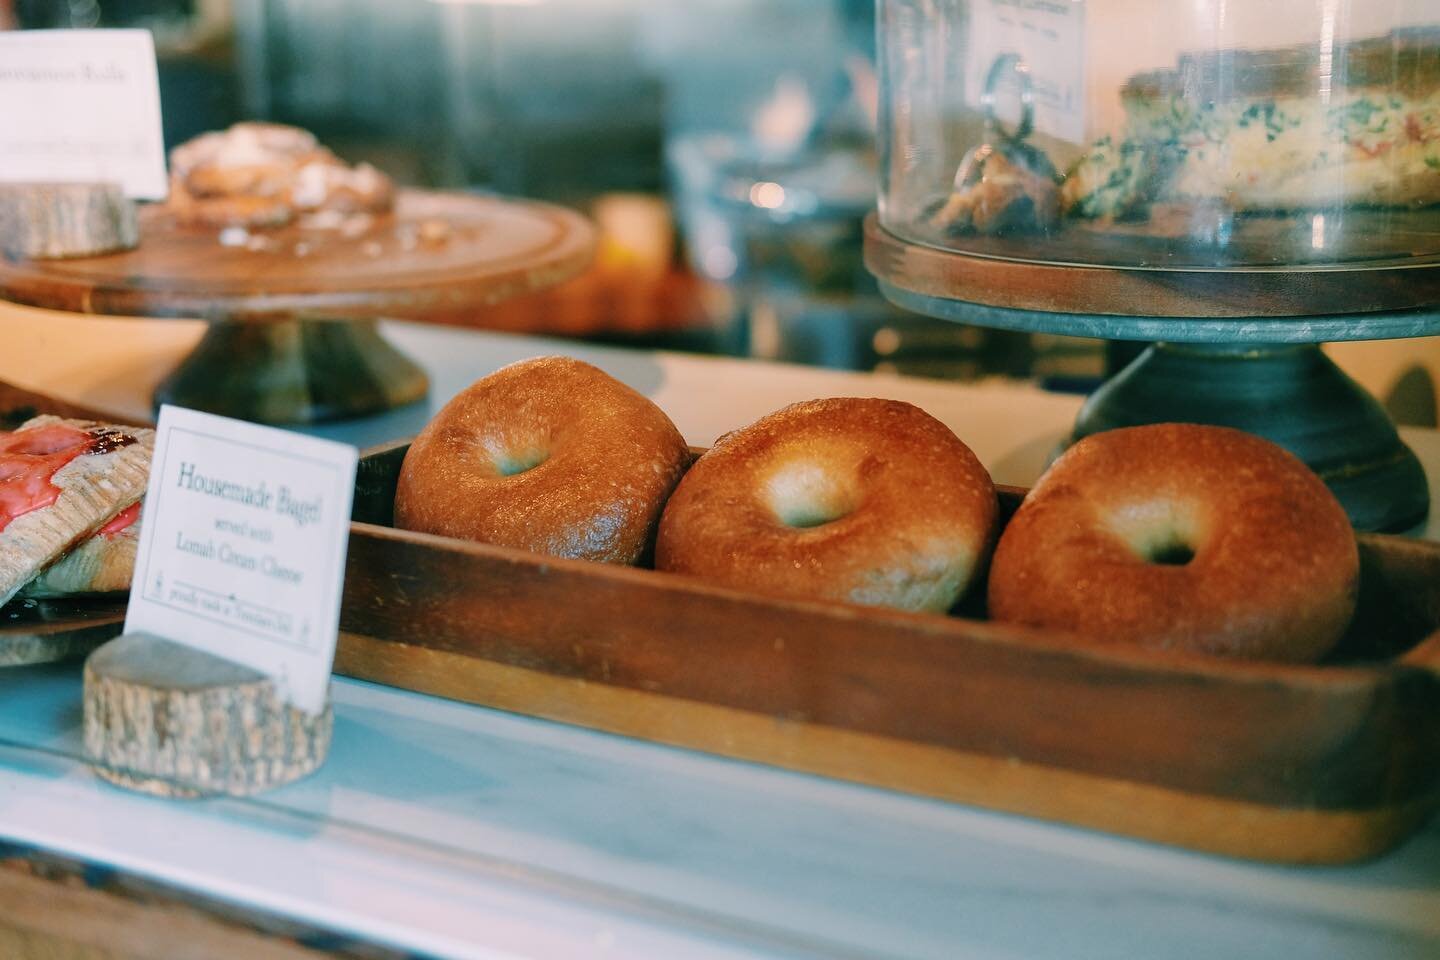 We&rsquo;re big fans of bagels, especially ones made by @trencherstulsa ✨ They pair perfectly with a hot drip coffee and sunshine ☕️🌞